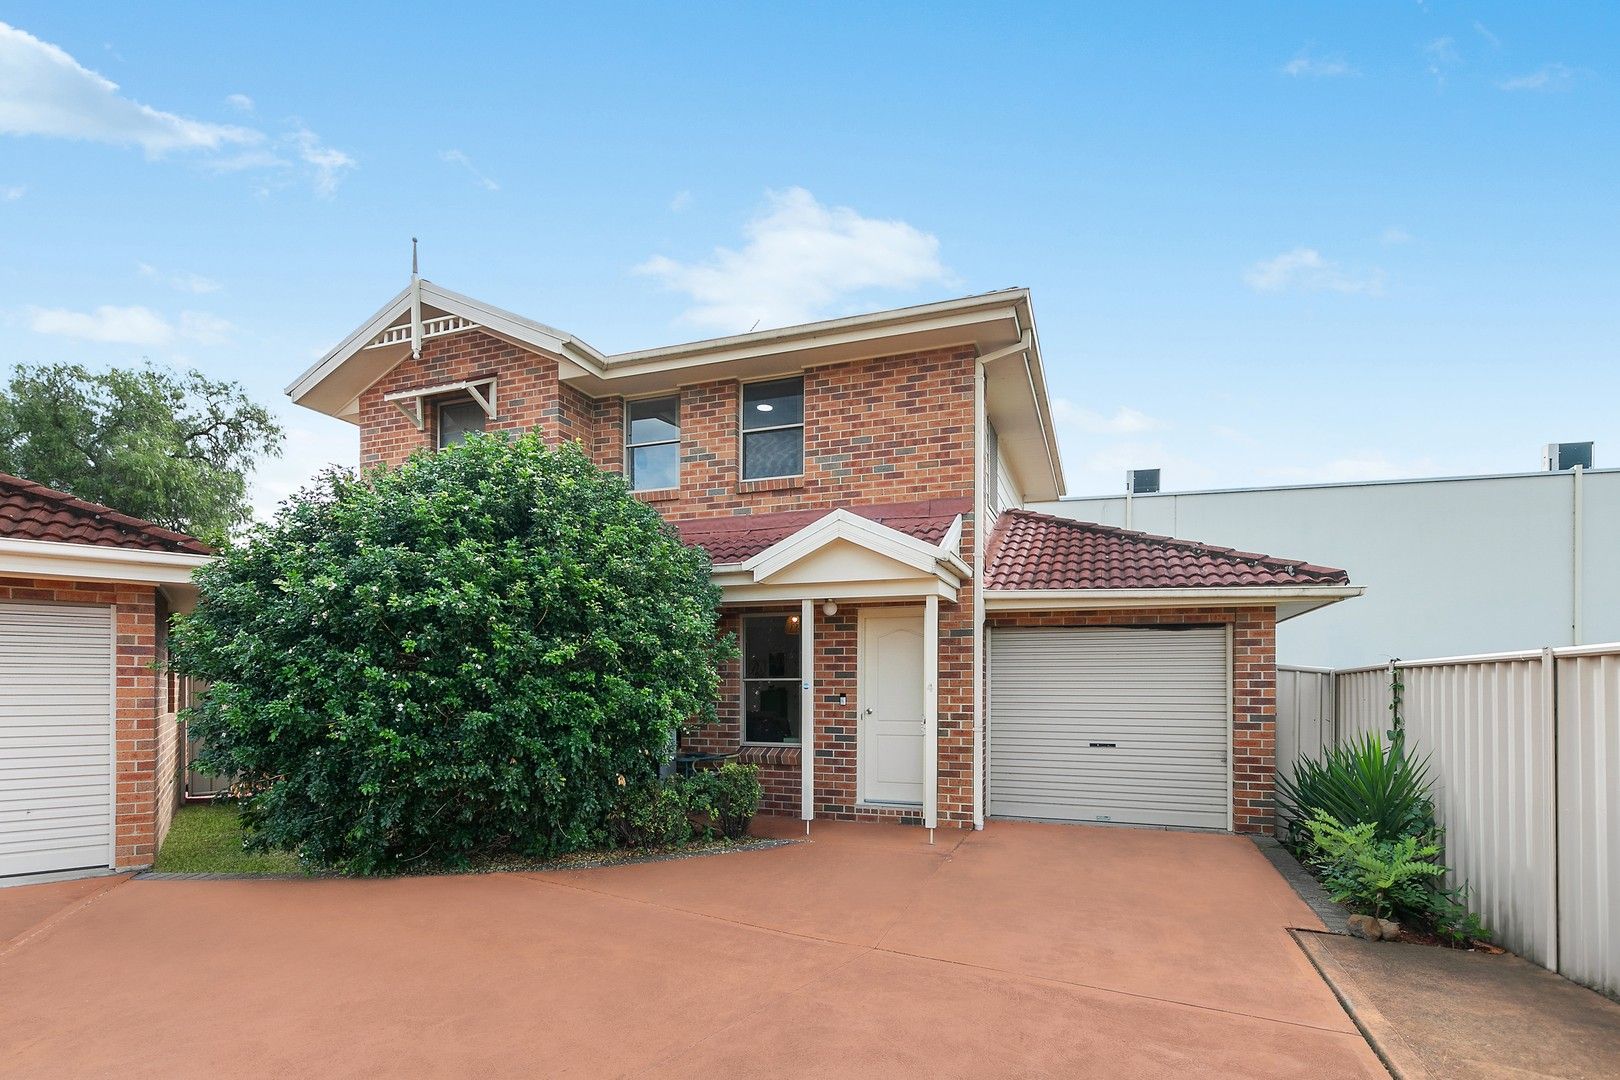 2 bedrooms Townhouse in 4/40 North Avenue CESSNOCK NSW, 2325